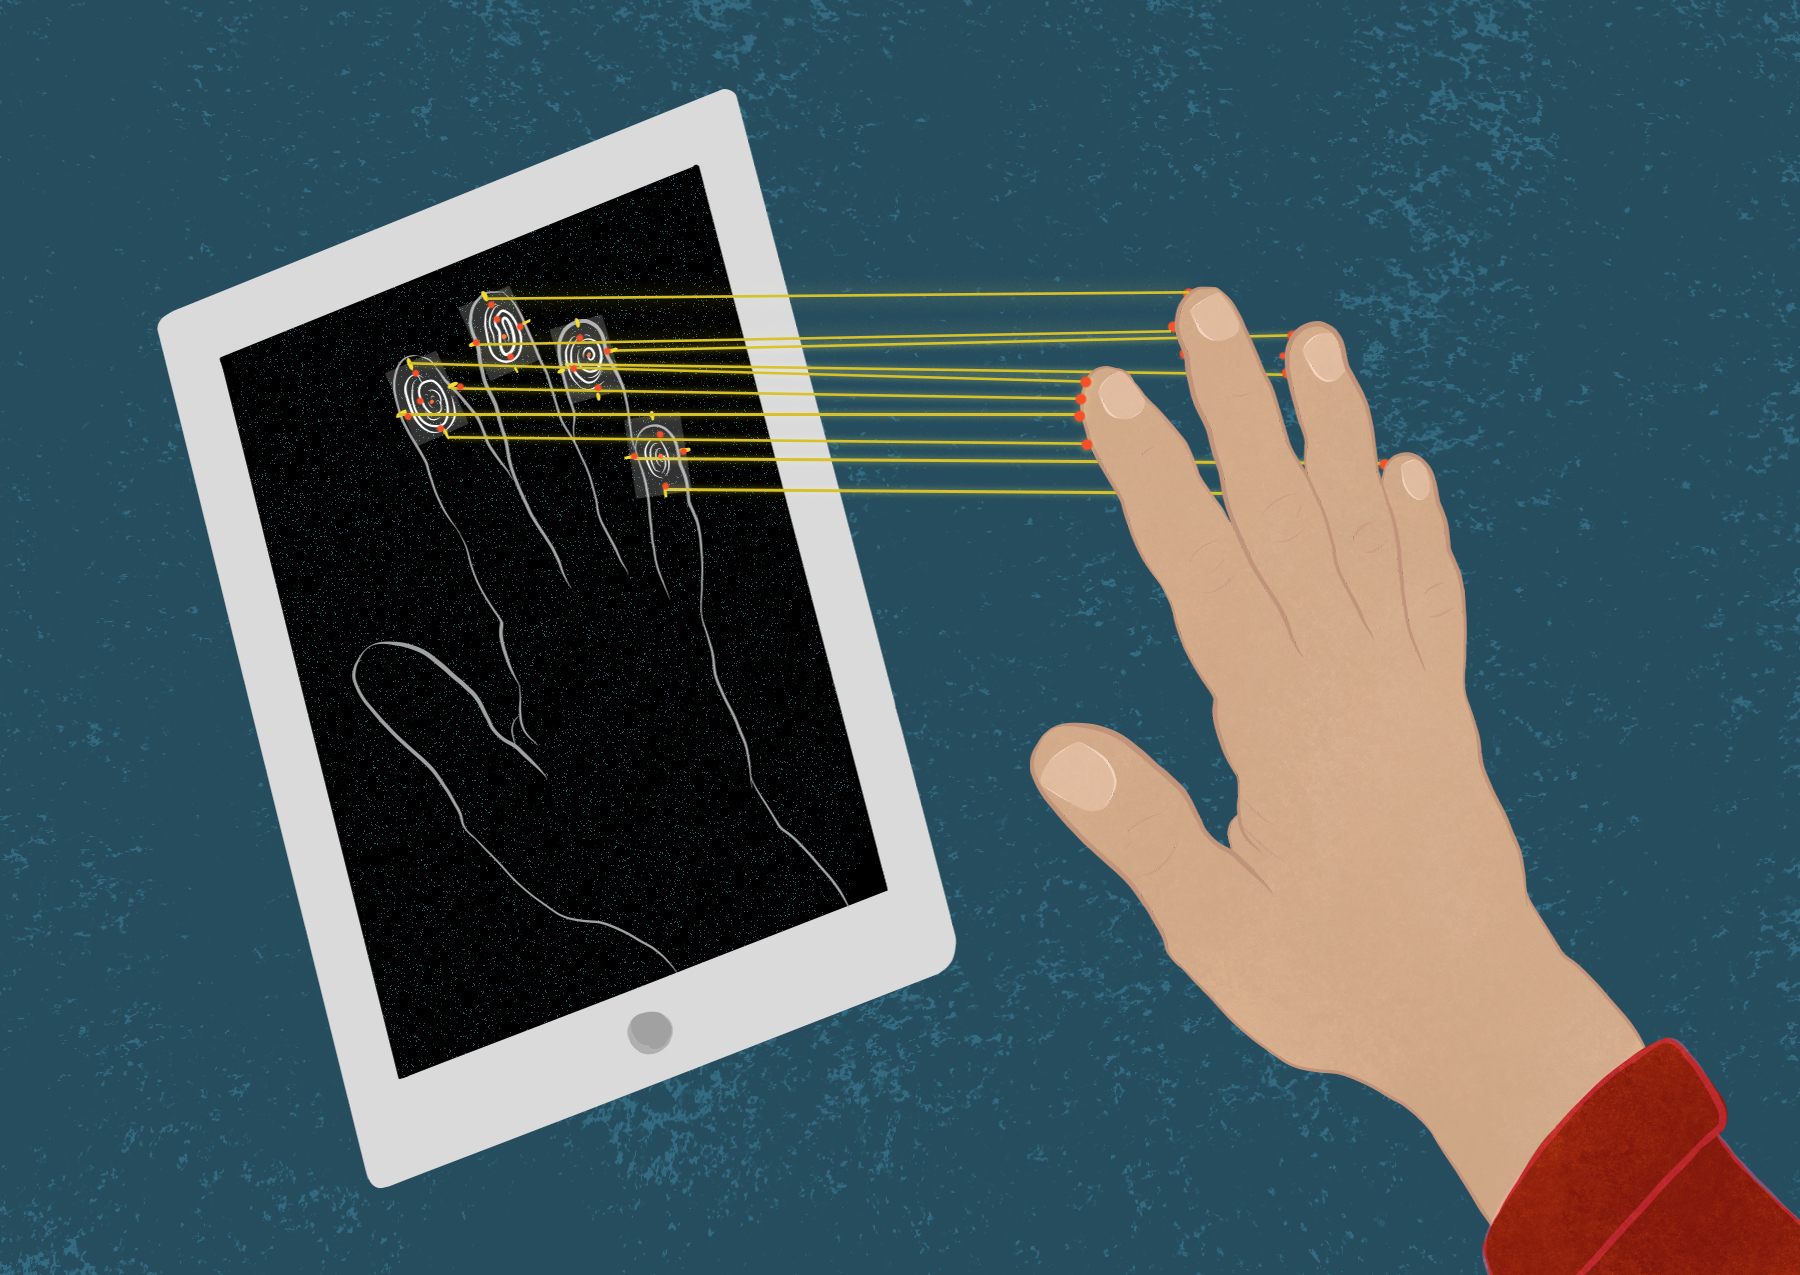 A mobile device scans the fingerprints of a hand held close to the screen. 